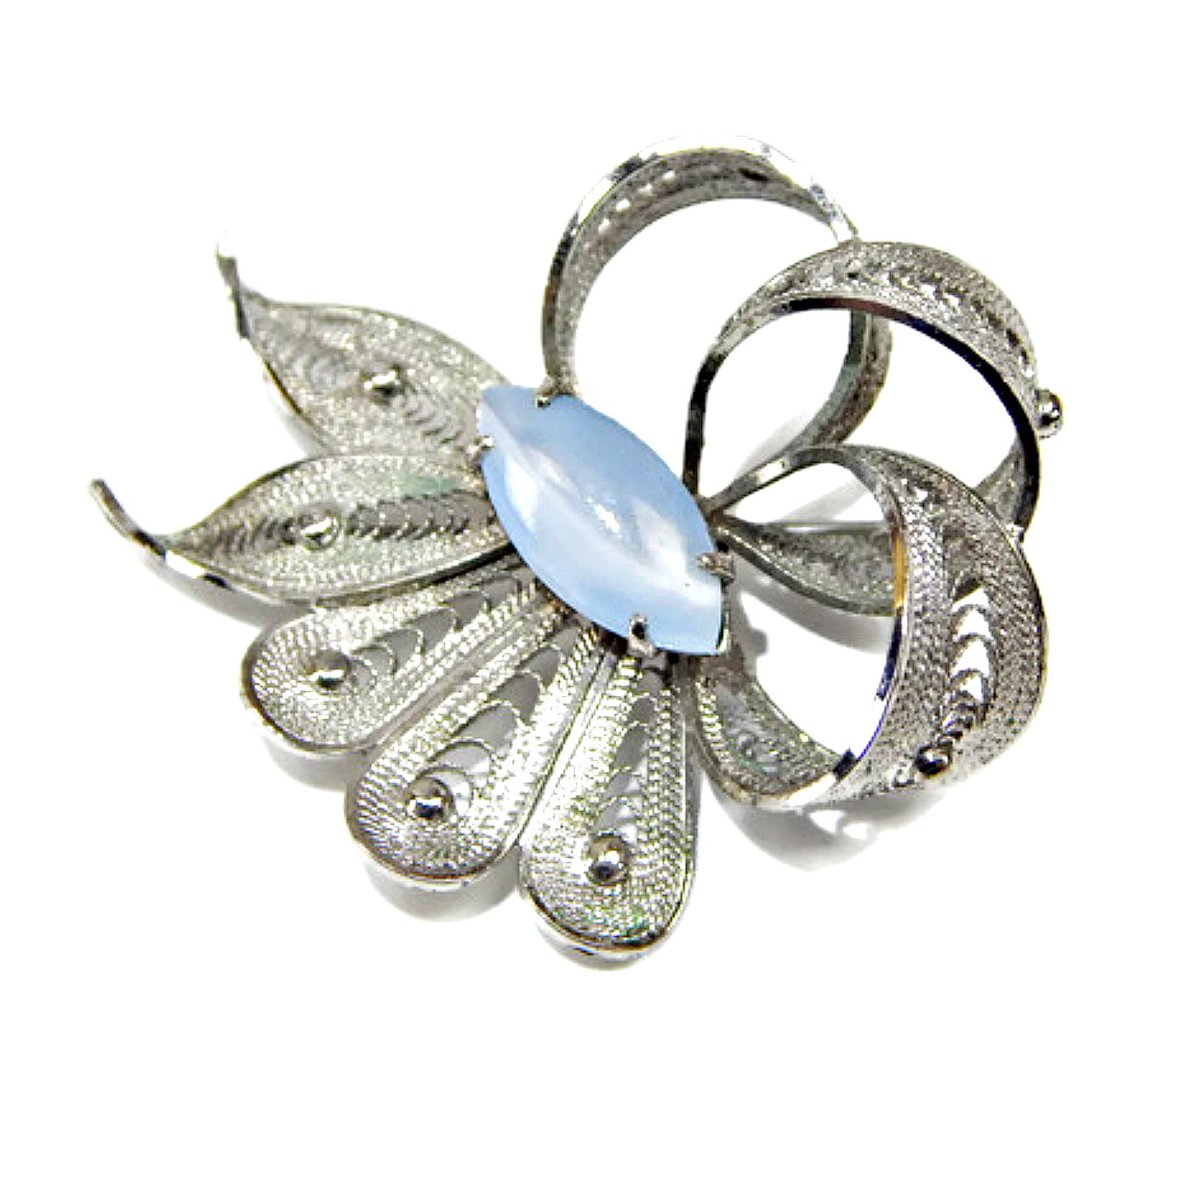 etsy.me/2Xp4rHG #aliceCaviness #sterlingsilverbrooch #signed #bluemoonglow #designerjewelry #collectiblejewelry #sterlingjewelry #silverjewelry #etsy #gotvintage